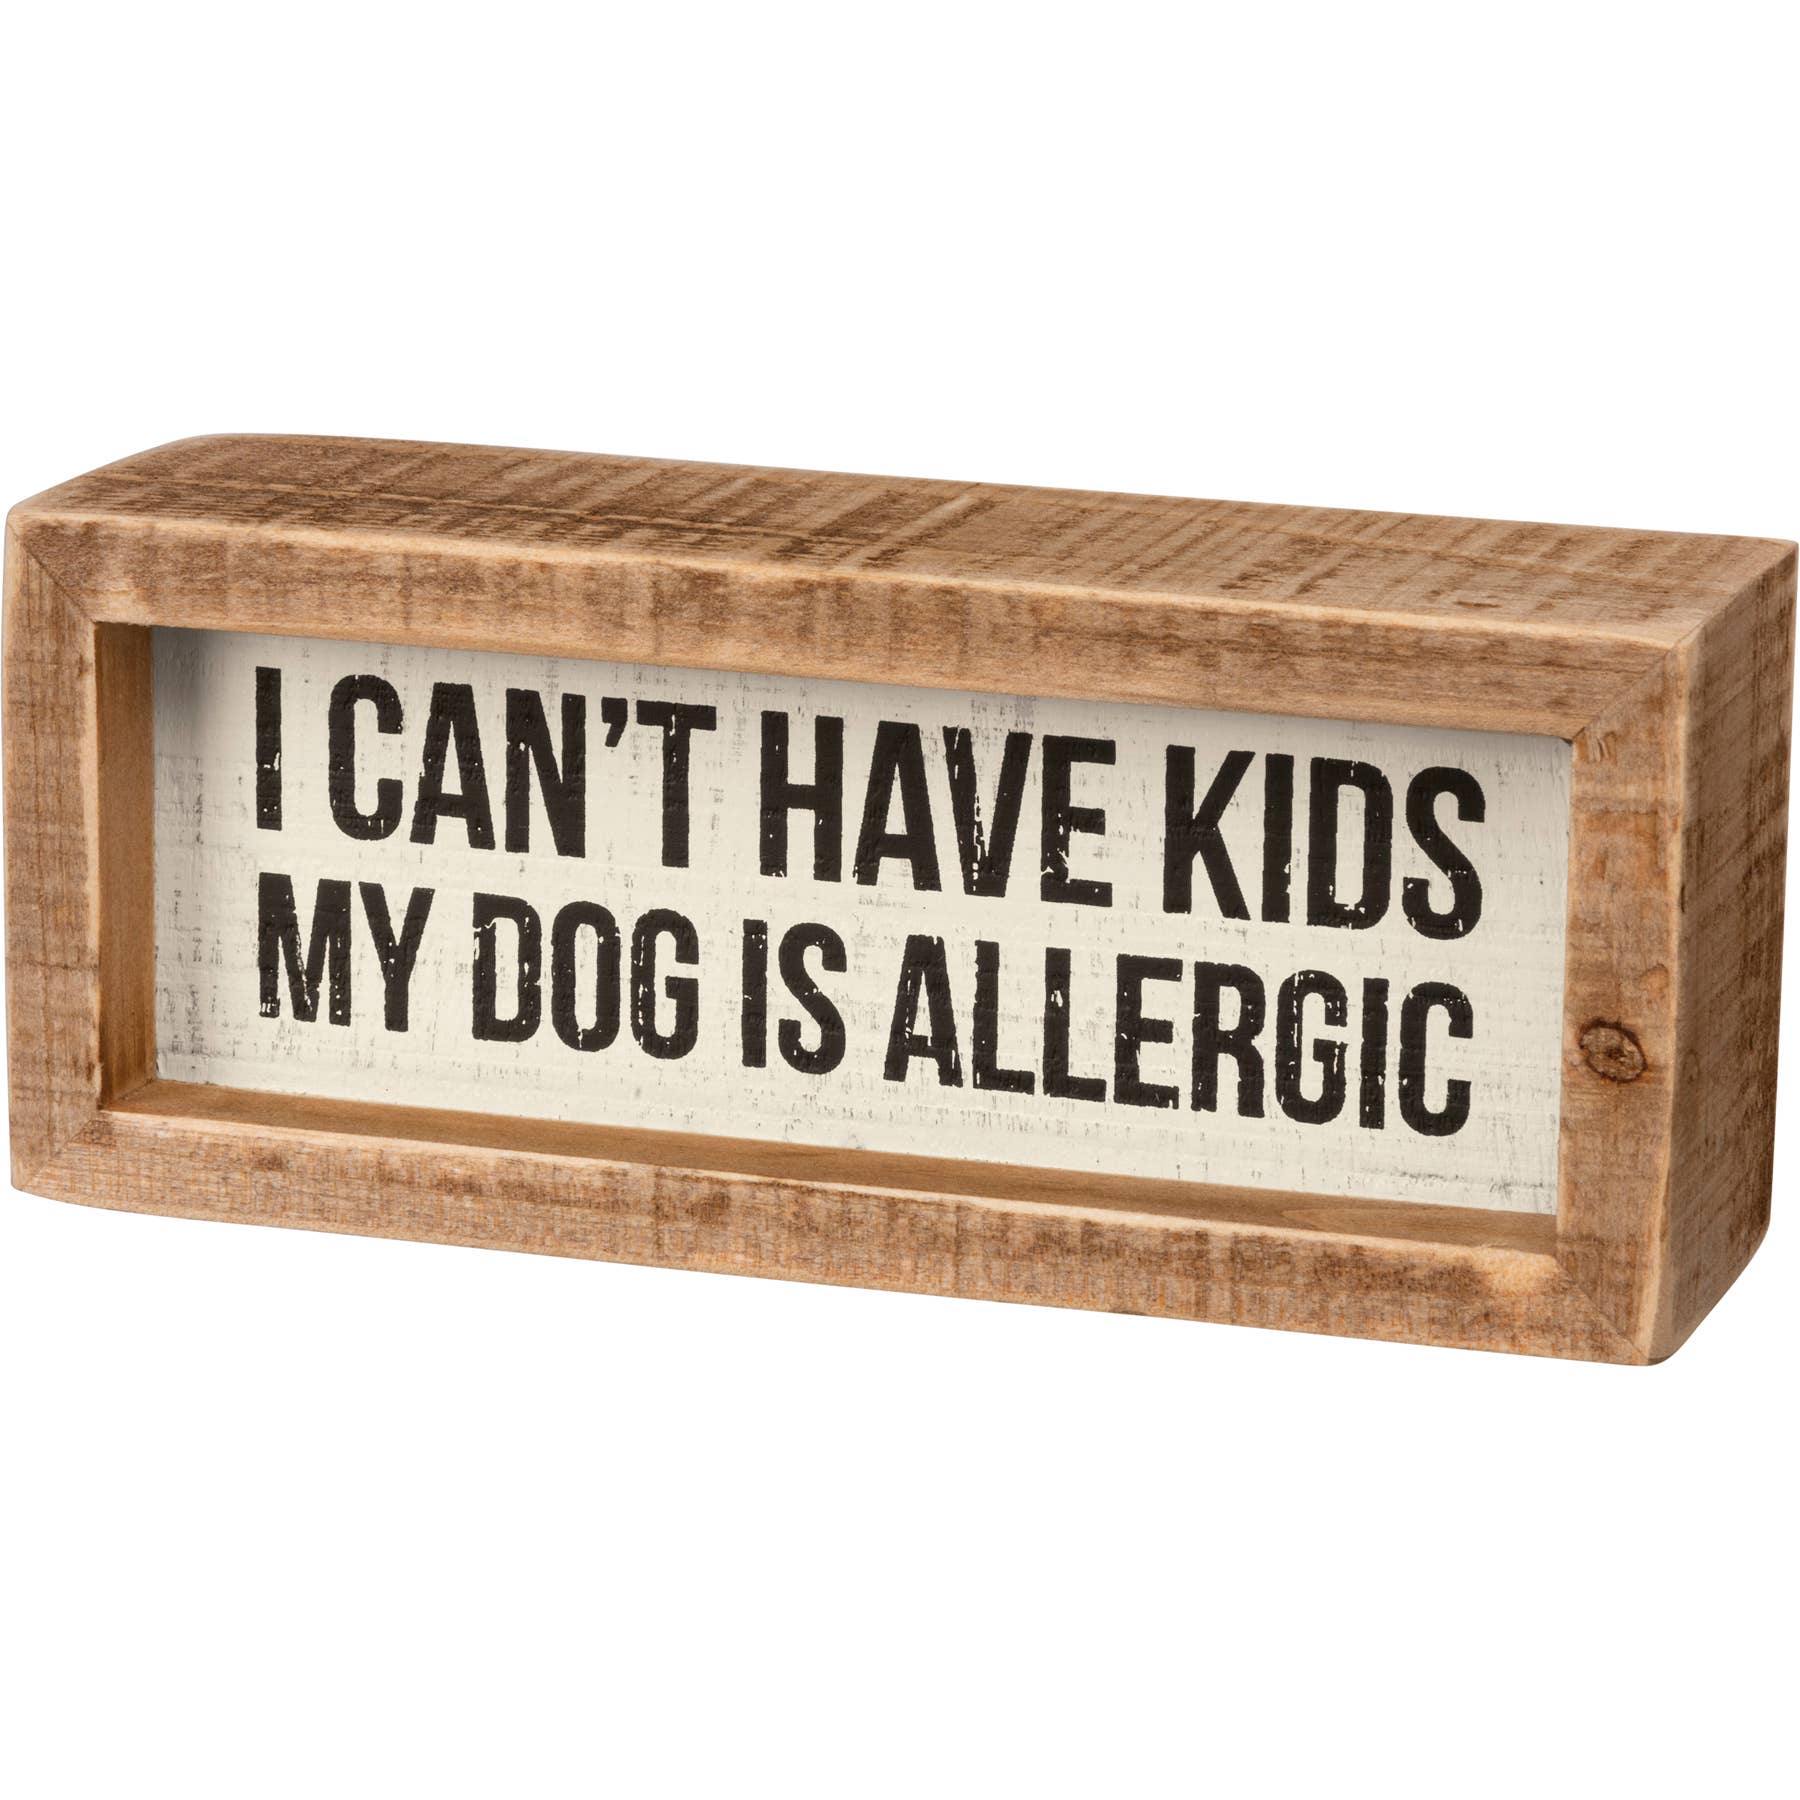 Primitives by Kathy - I Can't Have Kids Dog Is Allergic Inset Box Sign